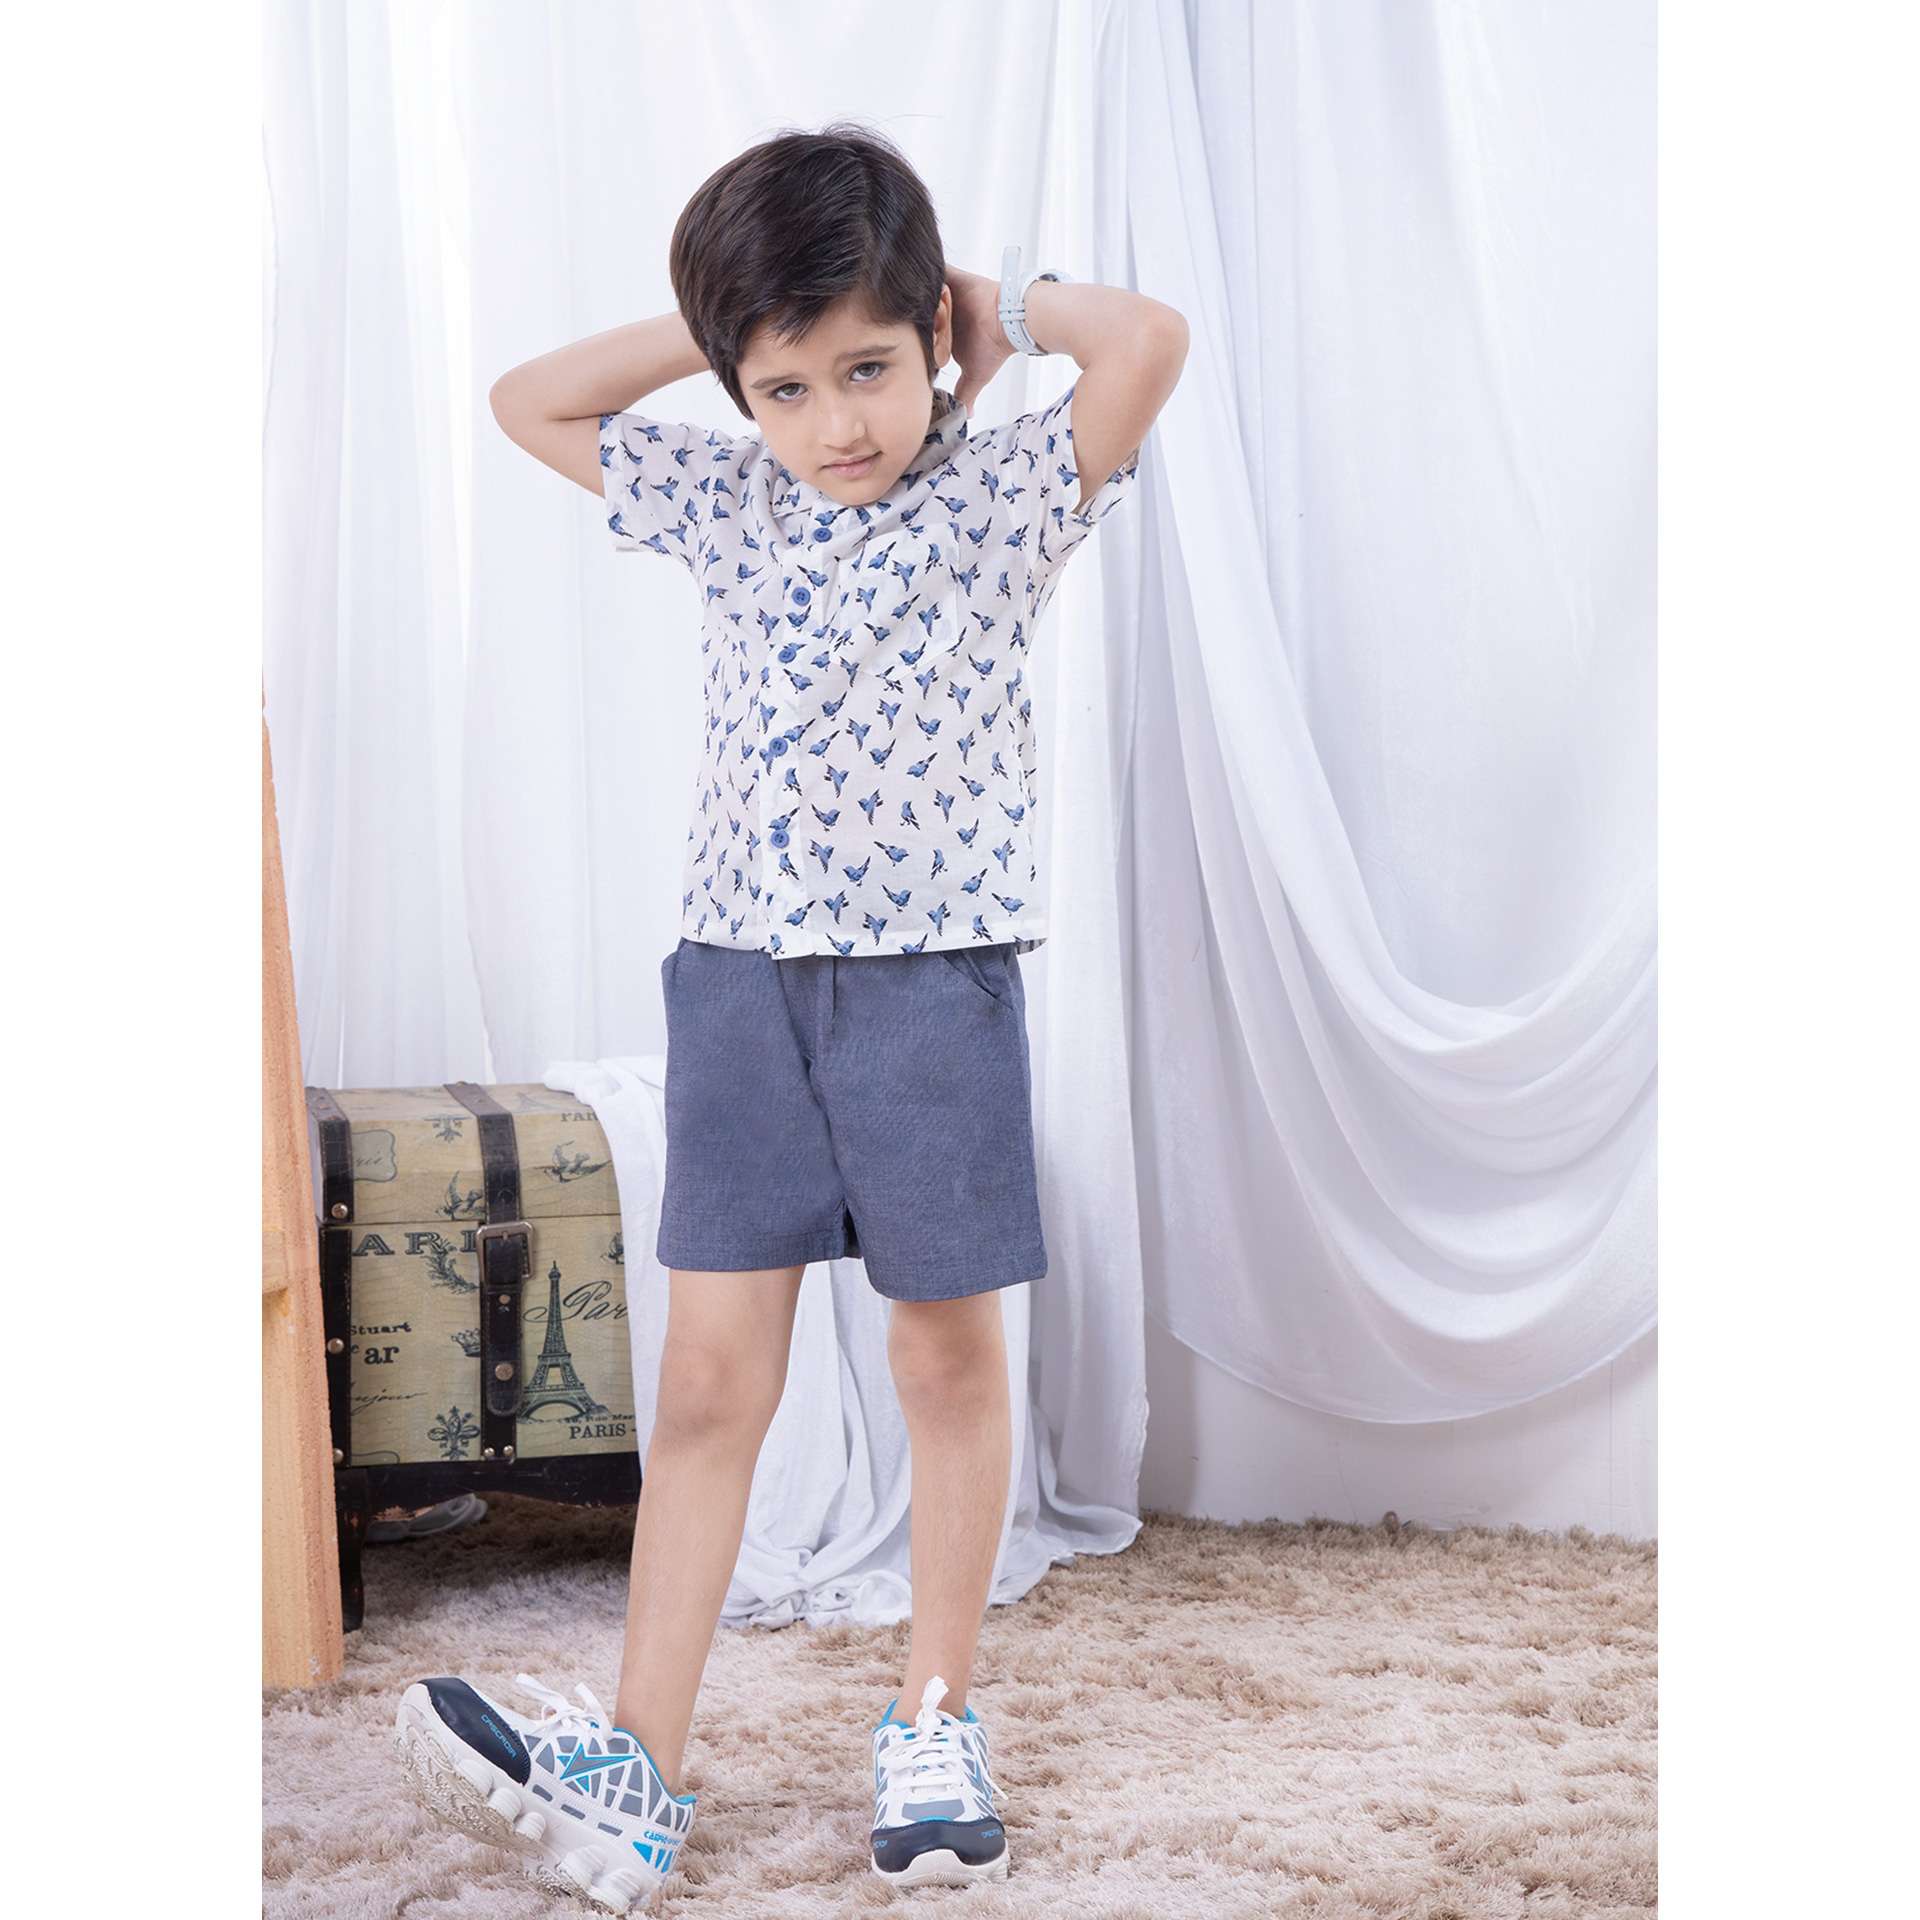 A little boy in white bird print shirt with buttons down the front paired with grey shorts